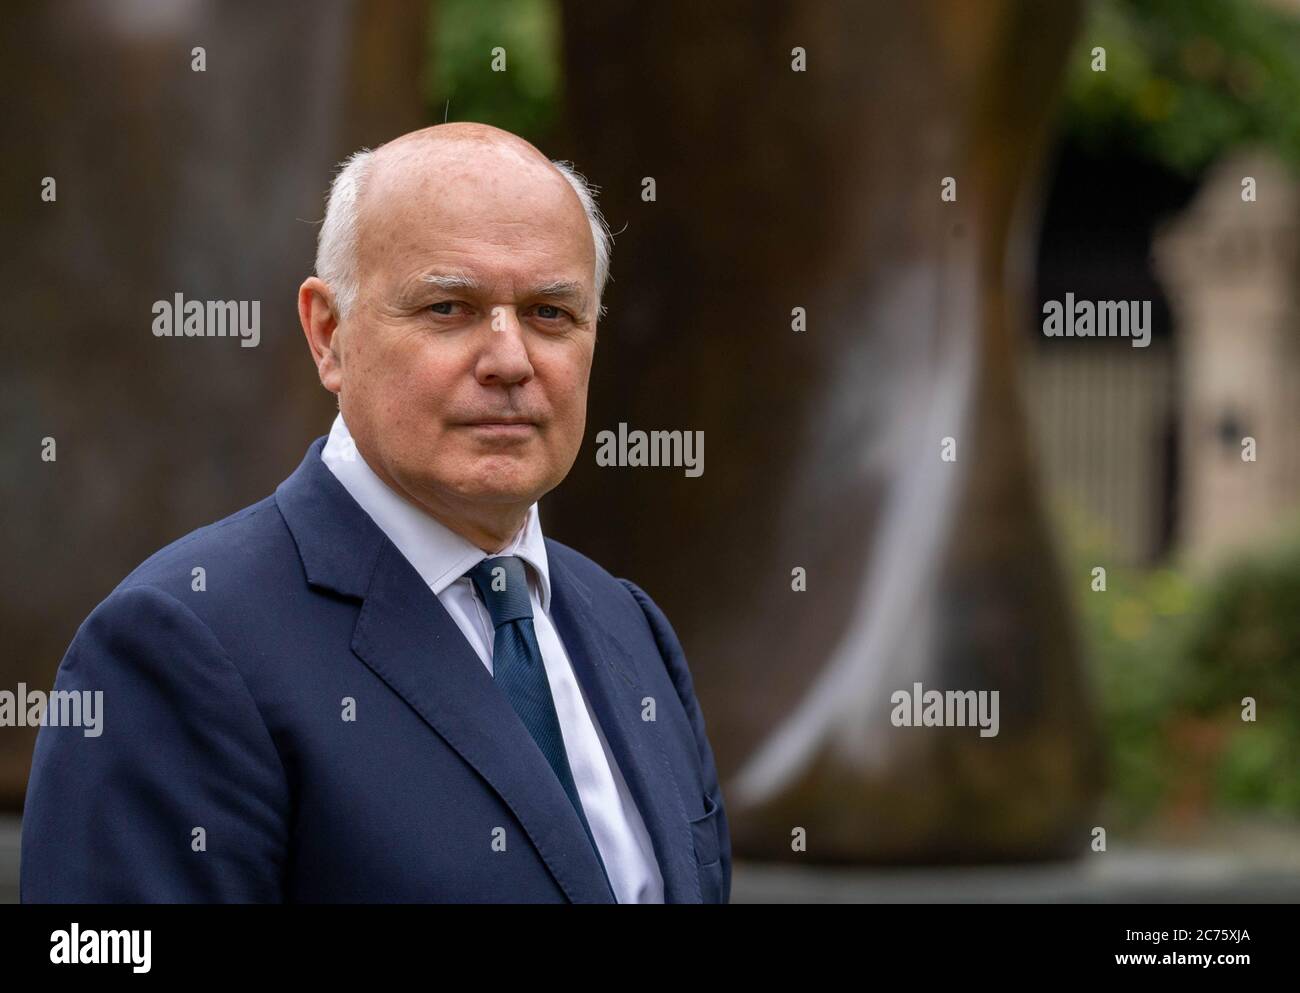 London, UK. 14th July, 2020. MP's in Westminster, Iain Duncan Smith Conservative MP for Chingford and Woodford and former leader of the Conservative party. He is pictured on College Green Westminster giving an interview on the Huawei UK 5G ban Credit: Ian Davidson/Alamy Live News Stock Photo